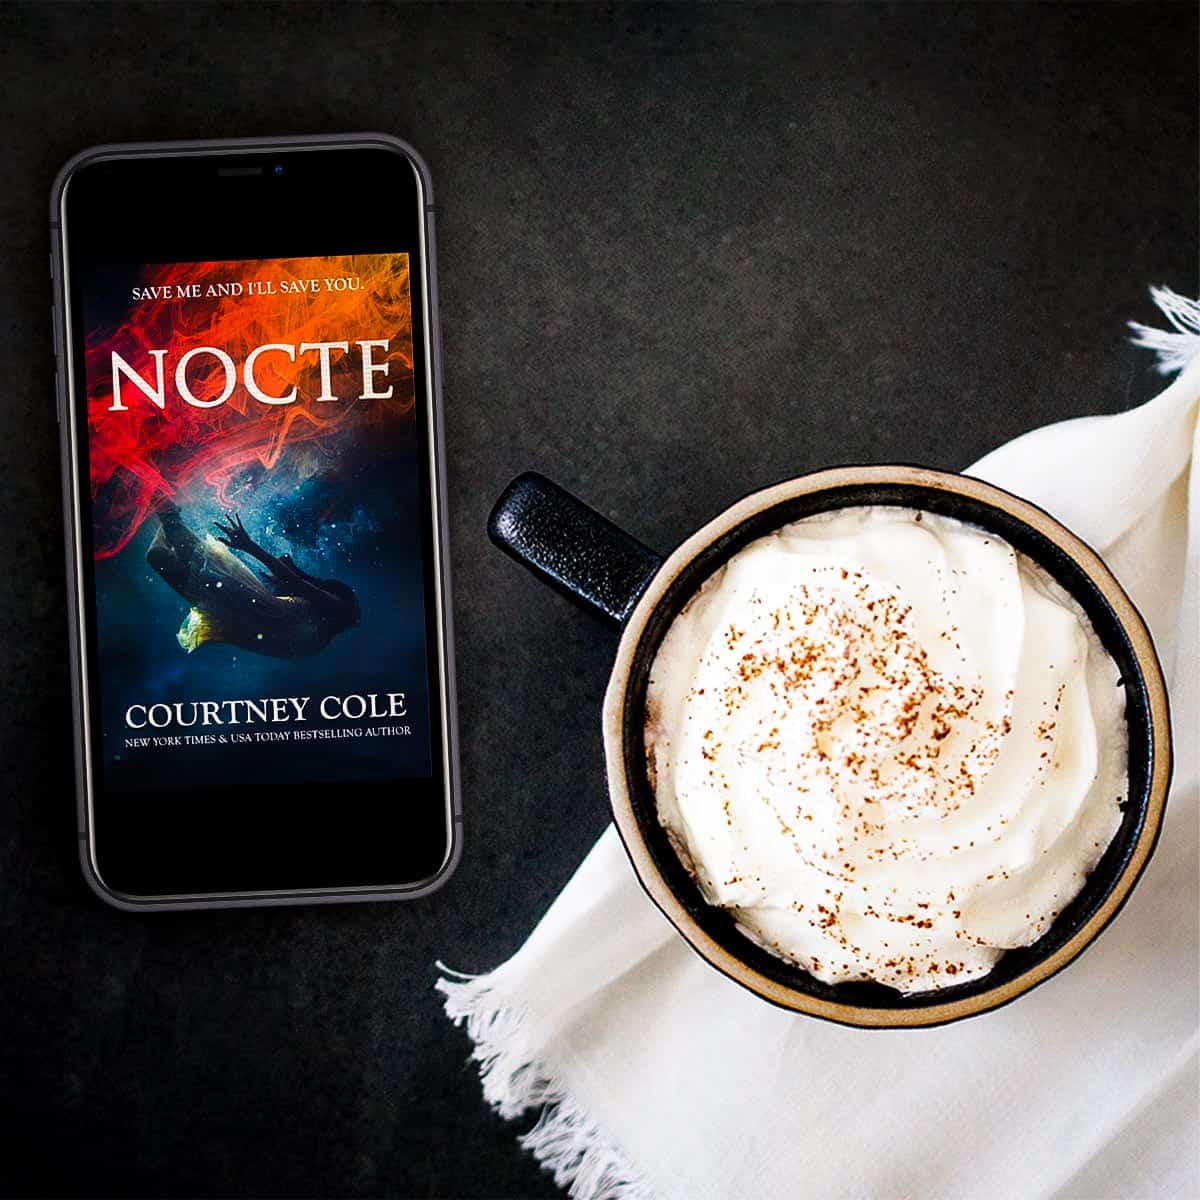 Nocte by Courtney Cole is a dark and moody psychological romantic suspense that is haunting and chock-full of mystery that is both unexpected and thrilling!